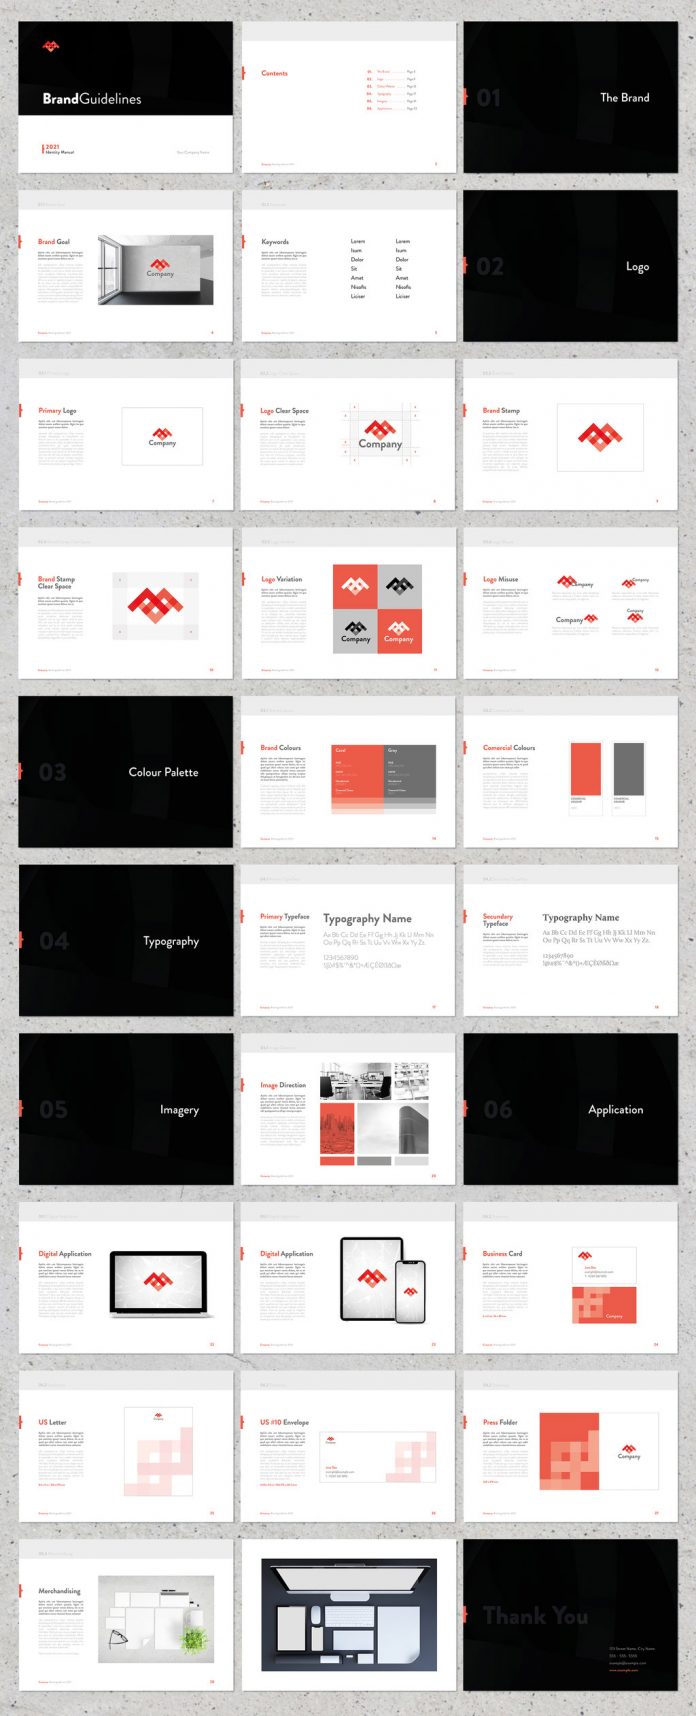 Brand Guidelines in Black and Red